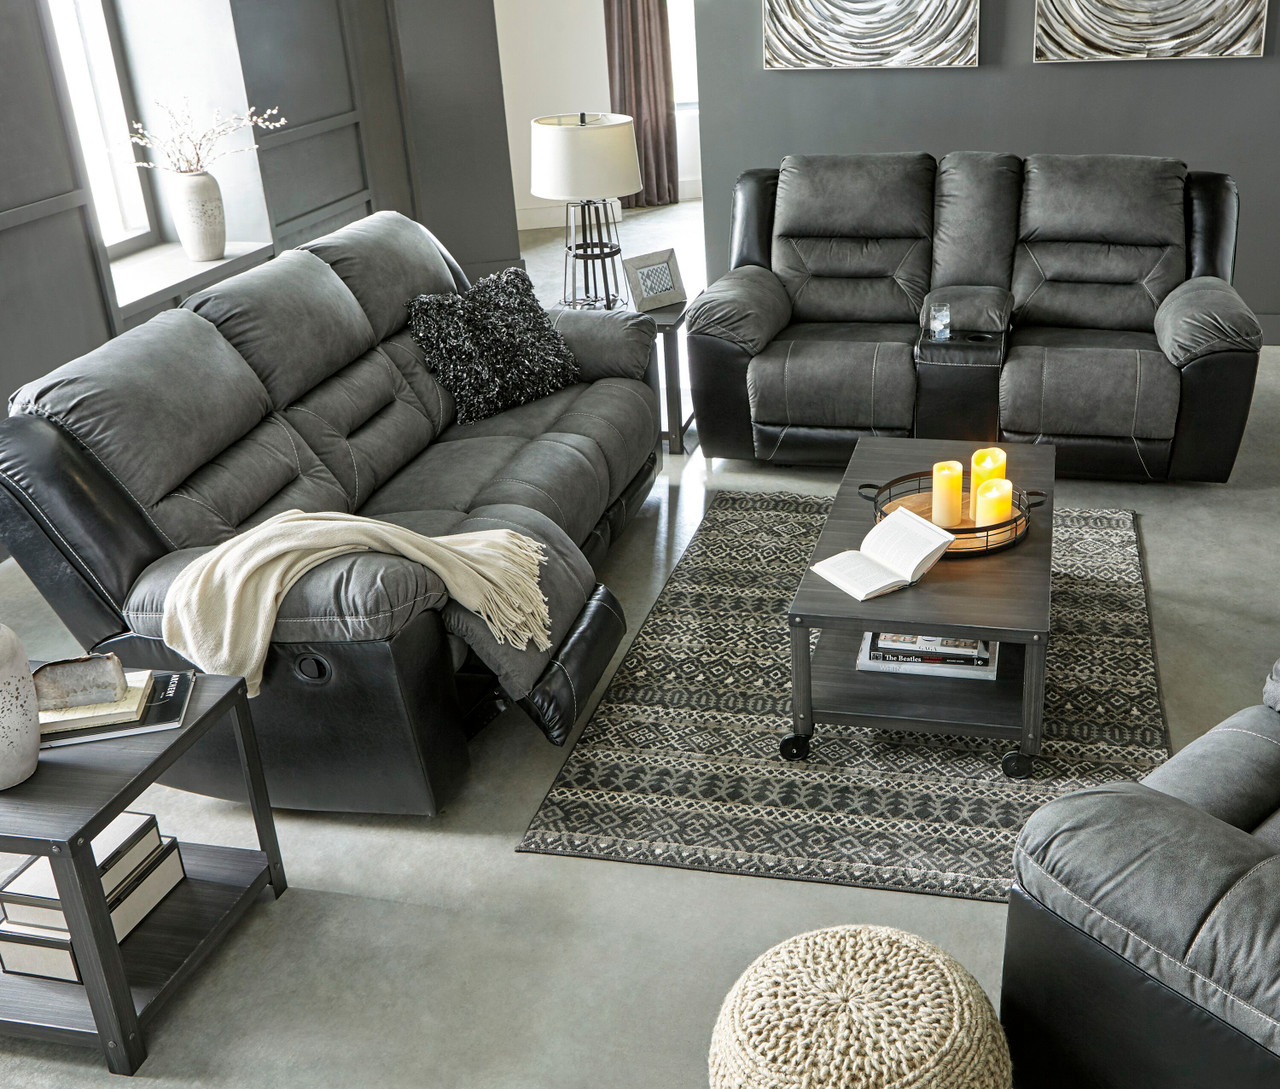 Kick Back and Relax: The Comfort of a Double Recliner Couch插图3